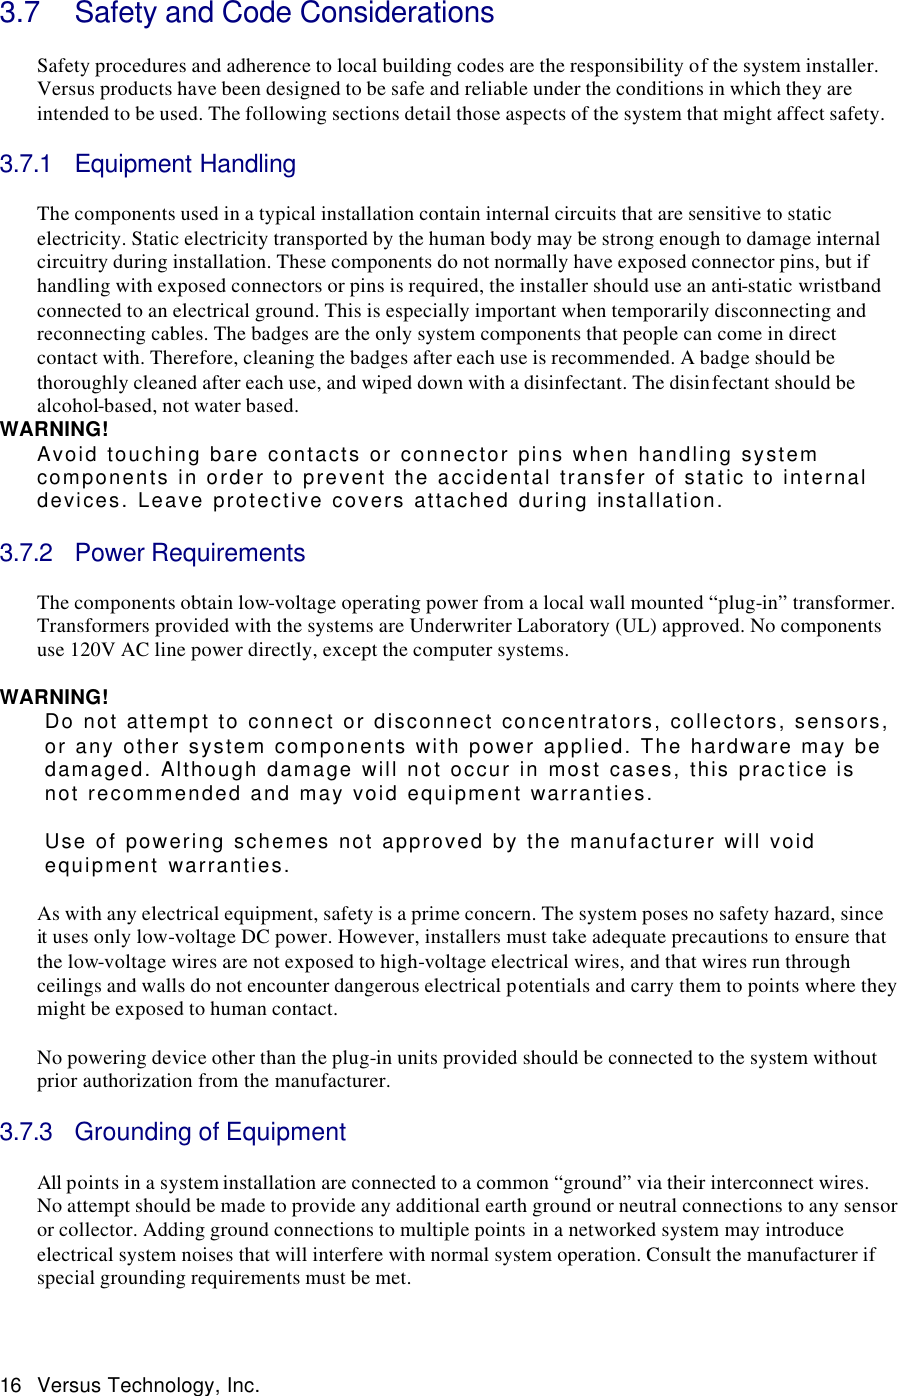  16 Versus Technology, Inc.  3.7 Safety and Code Considerations  Safety procedures and adherence to local building codes are the responsibility of the system installer. Versus products have been designed to be safe and reliable under the conditions in which they are intended to be used. The following sections detail those aspects of the system that might affect safety.    3.7.1 Equipment Handling  The components used in a typical installation contain internal circuits that are sensitive to static electricity. Static electricity transported by the human body may be strong enough to damage internal circuitry during installation. These components do not normally have exposed connector pins, but if handling with exposed connectors or pins is required, the installer should use an anti-static wristband connected to an electrical ground. This is especially important when temporarily disconnecting and reconnecting cables. The badges are the only system components that people can come in direct contact with. Therefore, cleaning the badges after each use is recommended. A badge should be thoroughly cleaned after each use, and wiped down with a disinfectant. The disinfectant should be alcohol-based, not water based.   WARNING! Avoid touching bare contacts or connector pins when handling system components in order to prevent the accidental transfer of static to internal devices. Leave protective covers attached during installation.  3.7.2 Power Requirements  The components obtain low-voltage operating power from a local wall mounted “plug-in” transformer. Transformers provided with the systems are Underwriter Laboratory (UL) approved. No components use 120V AC line power directly, except the computer systems.   WARNING! Do not attempt to connect or disconnect concentrators, collectors, sensors, or any other system components with power applied. The hardware may be damaged. Although damage will not occur in most cases, this practice is not recommended and may void equipment warranties.    Use of powering schemes not approved by the manufacturer will void equipment warranties.  As with any electrical equipment, safety is a prime concern. The system poses no safety hazard, since it uses only low-voltage DC power. However, installers must take adequate precautions to ensure that the low-voltage wires are not exposed to high-voltage electrical wires, and that wires run through ceilings and walls do not encounter dangerous electrical potentials and carry them to points where they might be exposed to human contact.   No powering device other than the plug-in units provided should be connected to the system without prior authorization from the manufacturer.   3.7.3 Grounding of Equipment  All points in a system installation are connected to a common “ground” via their interconnect wires. No attempt should be made to provide any additional earth ground or neutral connections to any sensor or collector. Adding ground connections to multiple points in a networked system may introduce electrical system noises that will interfere with normal system operation. Consult the manufacturer if special grounding requirements must be met.  